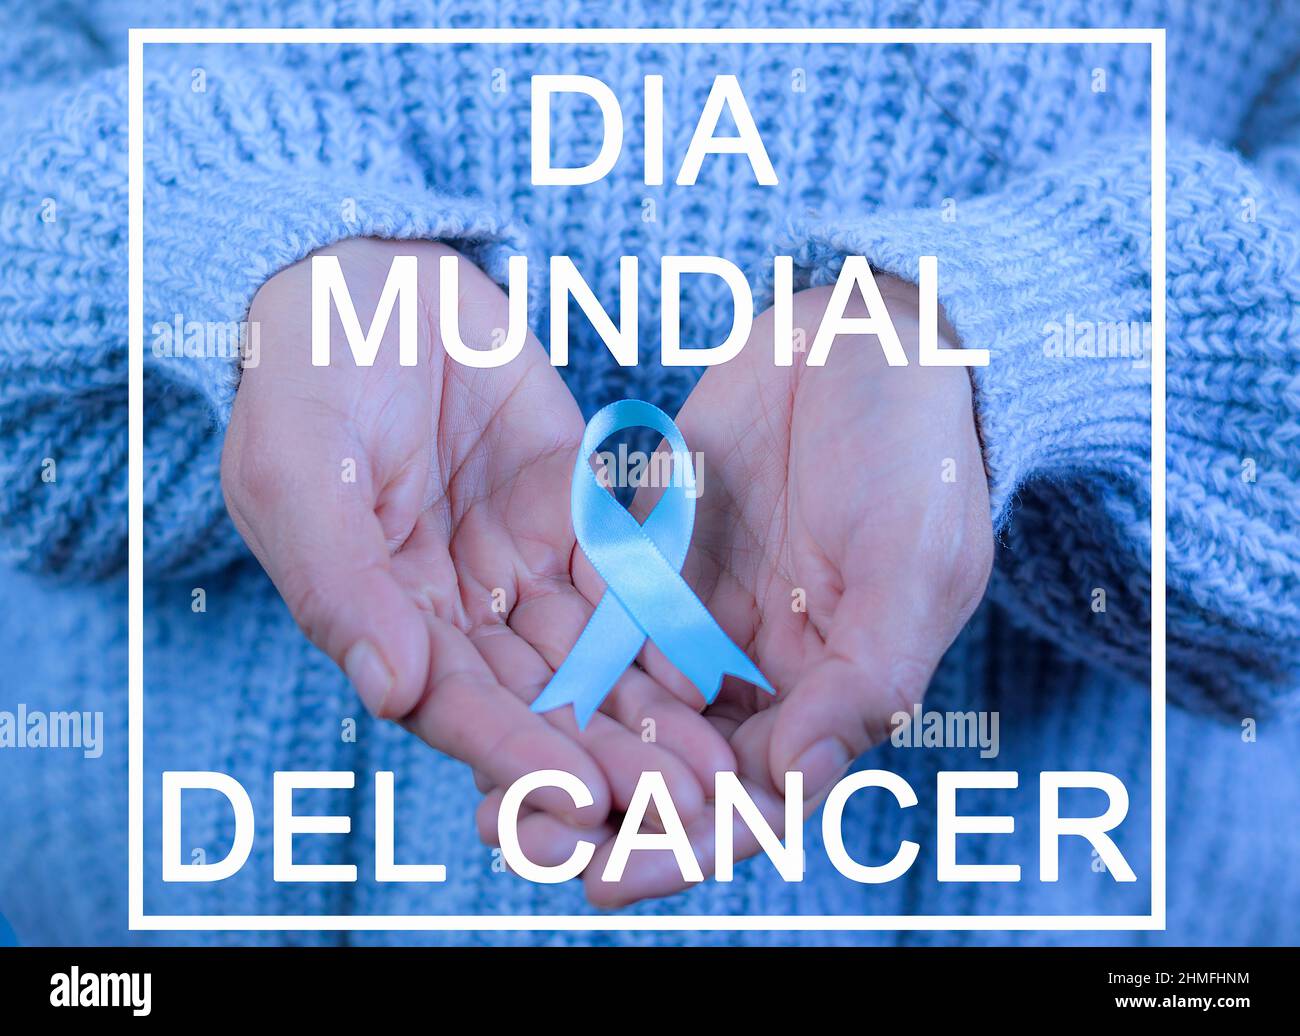 November Prostate Cancer Awareness Month, A Woman's Hands Holding Blue Ribbon in Support of People with Cancer. Prostate cancer and health awareness c Stock Photo